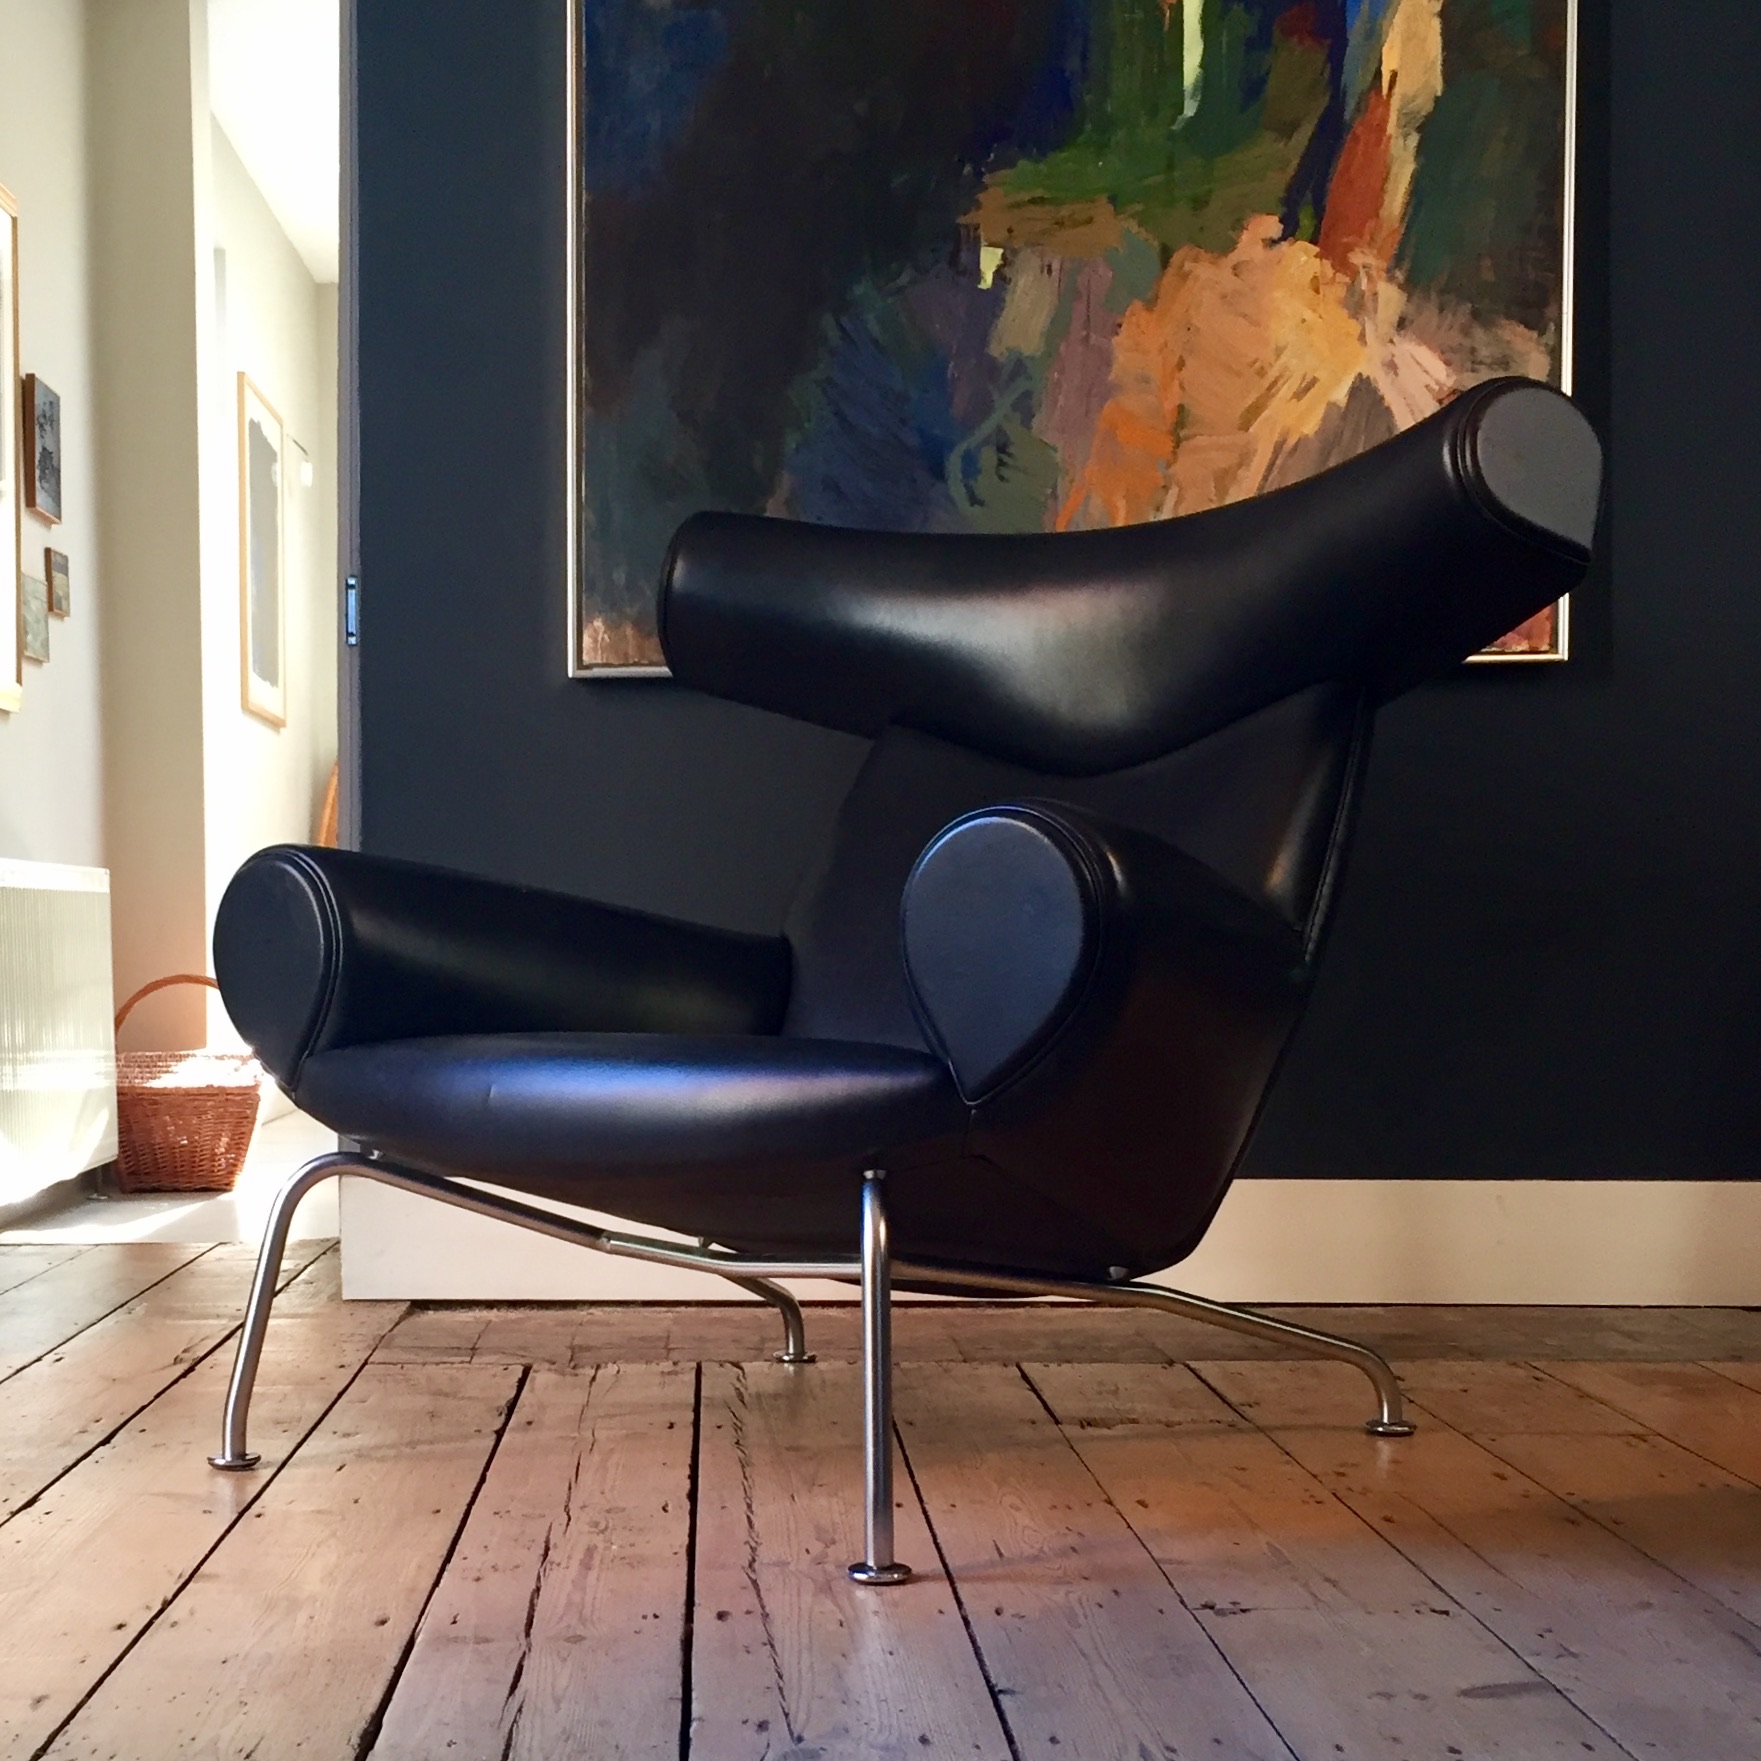 The OX chair by Wegner